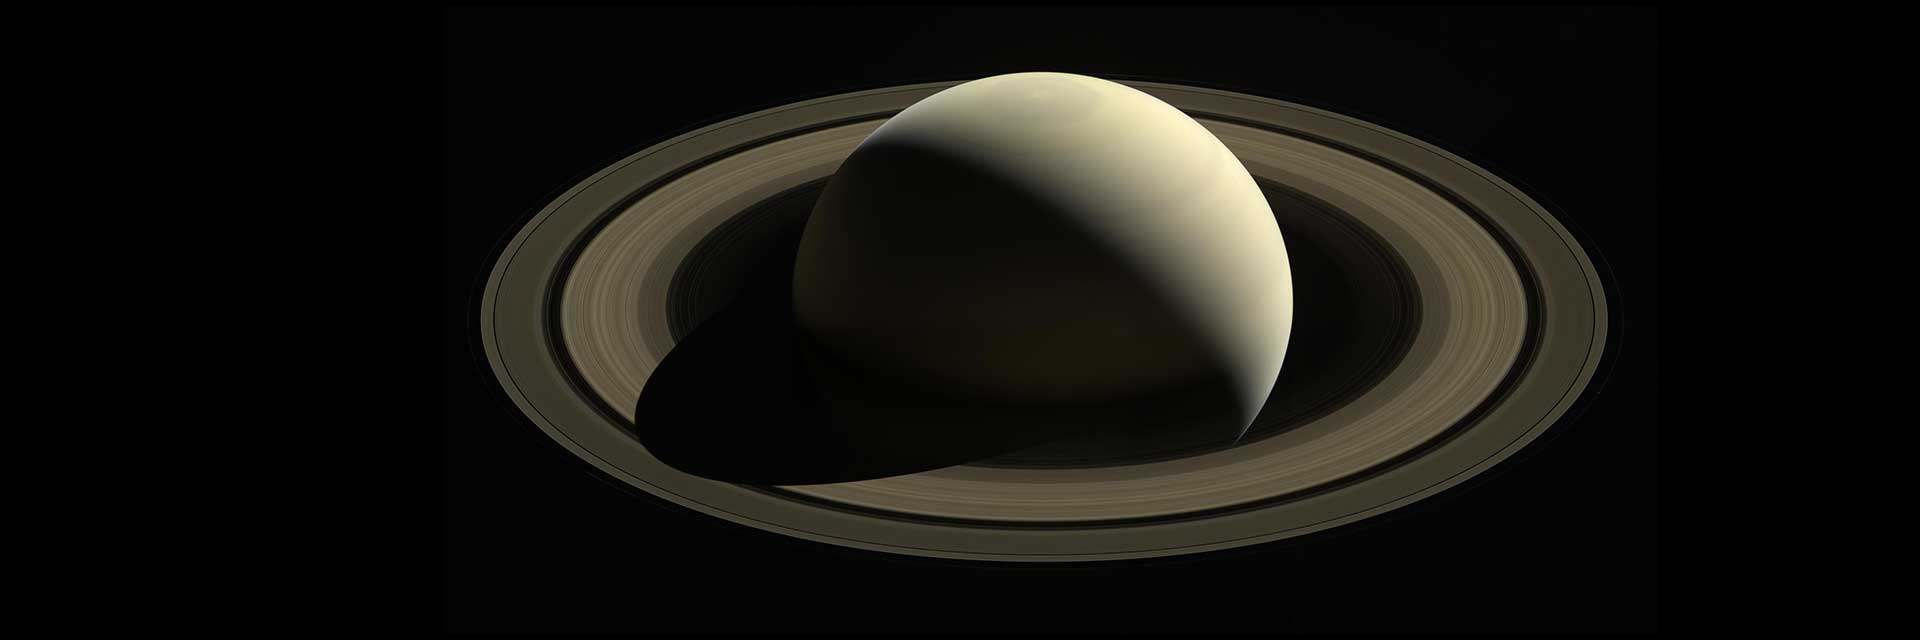 A view of Saturn from the Cassini spacecraft shows the golden planet with its rings.